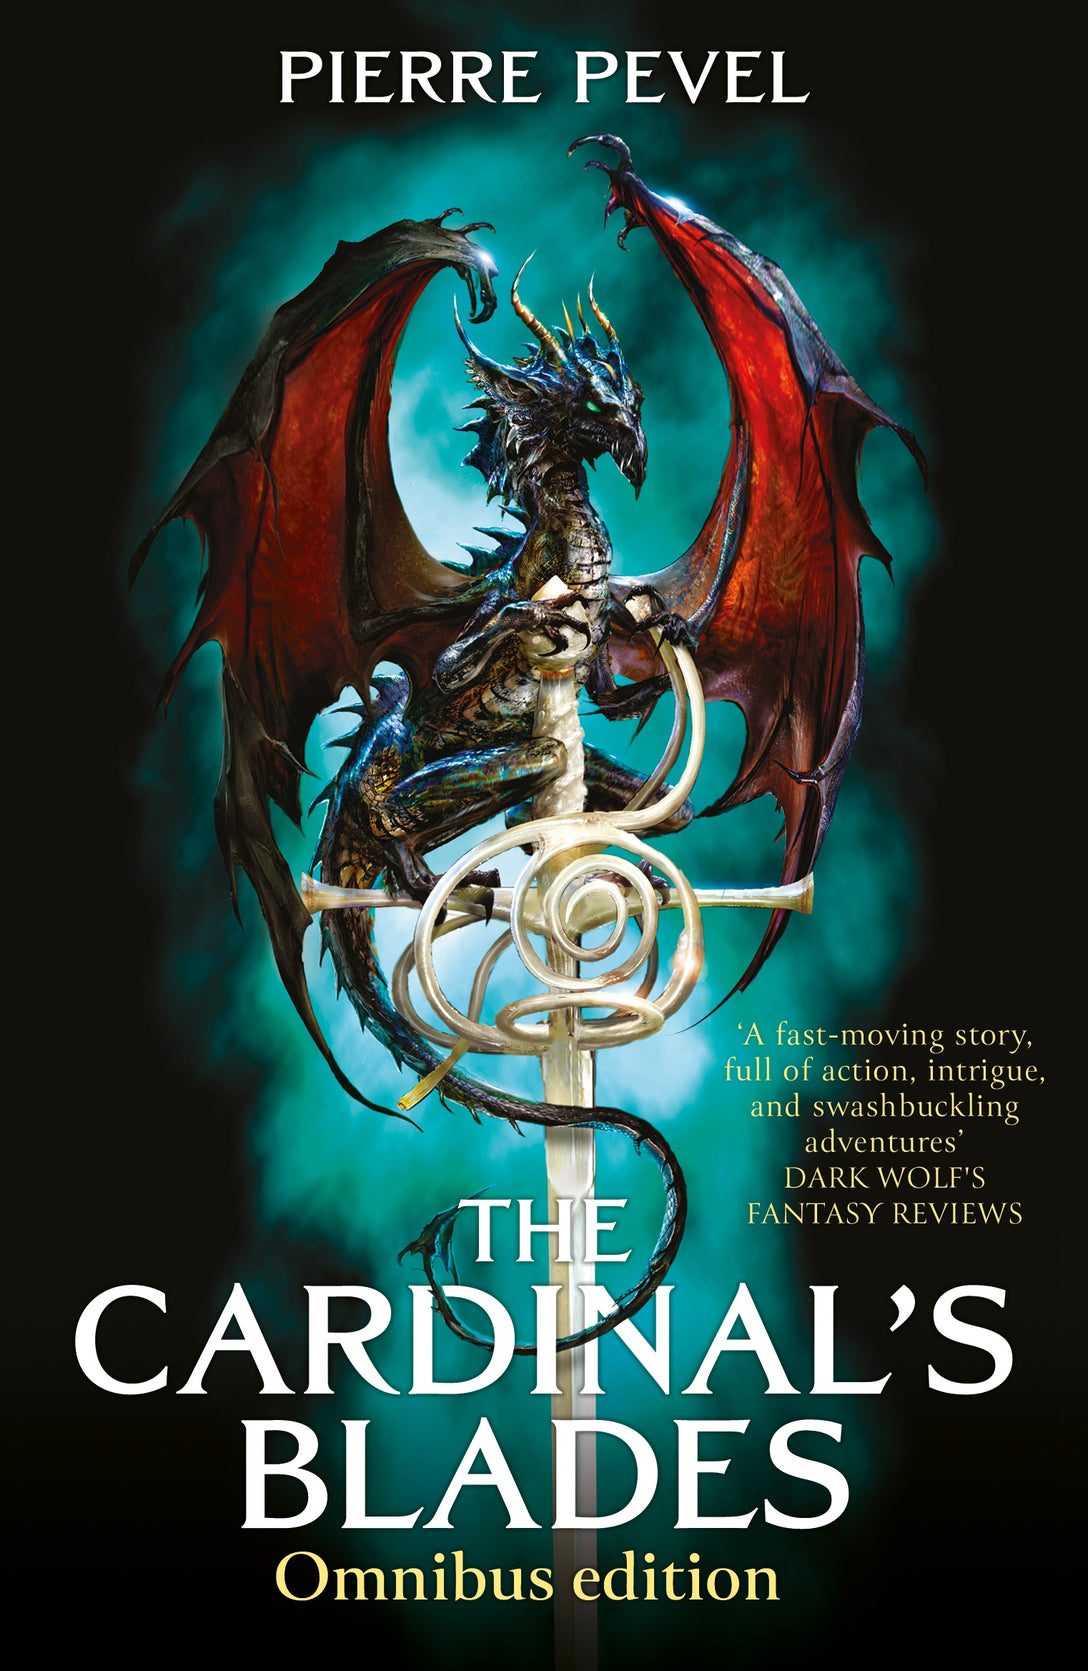 The Cardinal's Blades Omnibus by Pierre Pevel